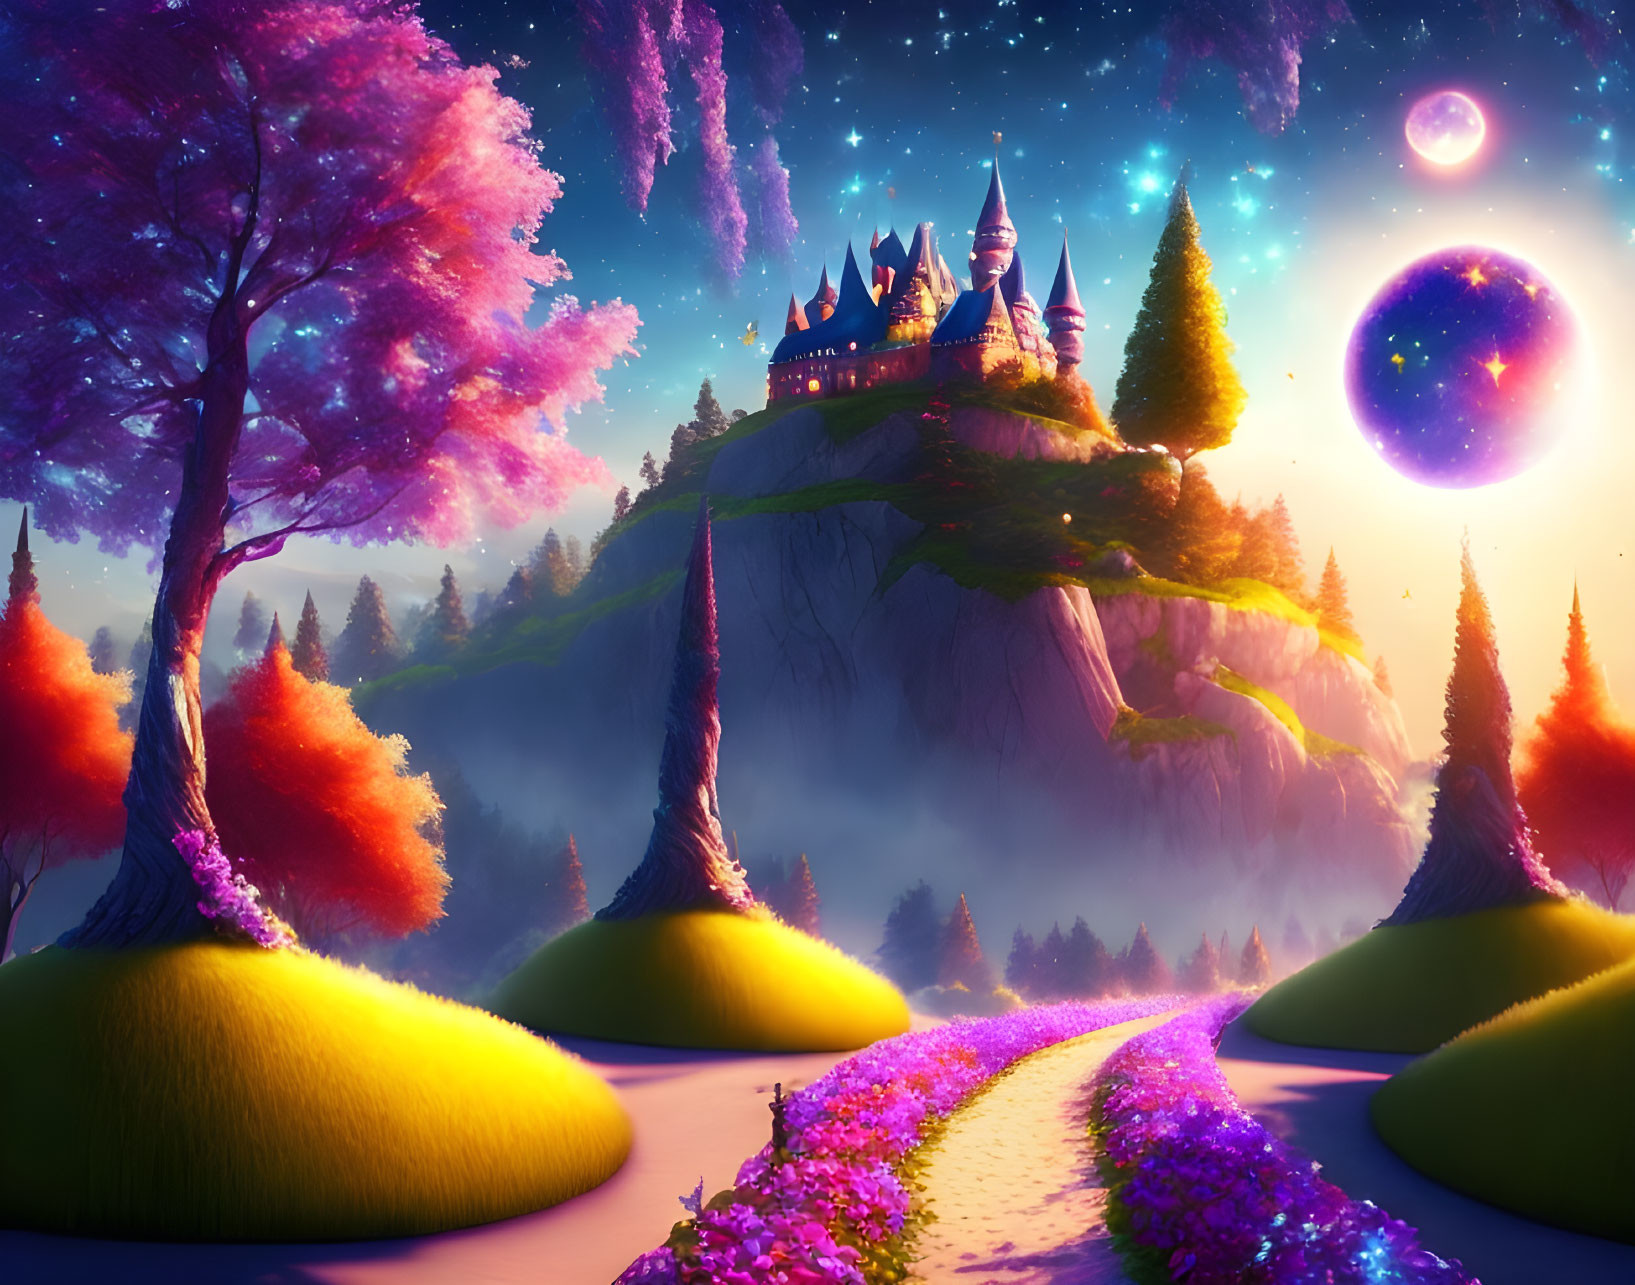 Enchanting floating island with magical castle under purple sky